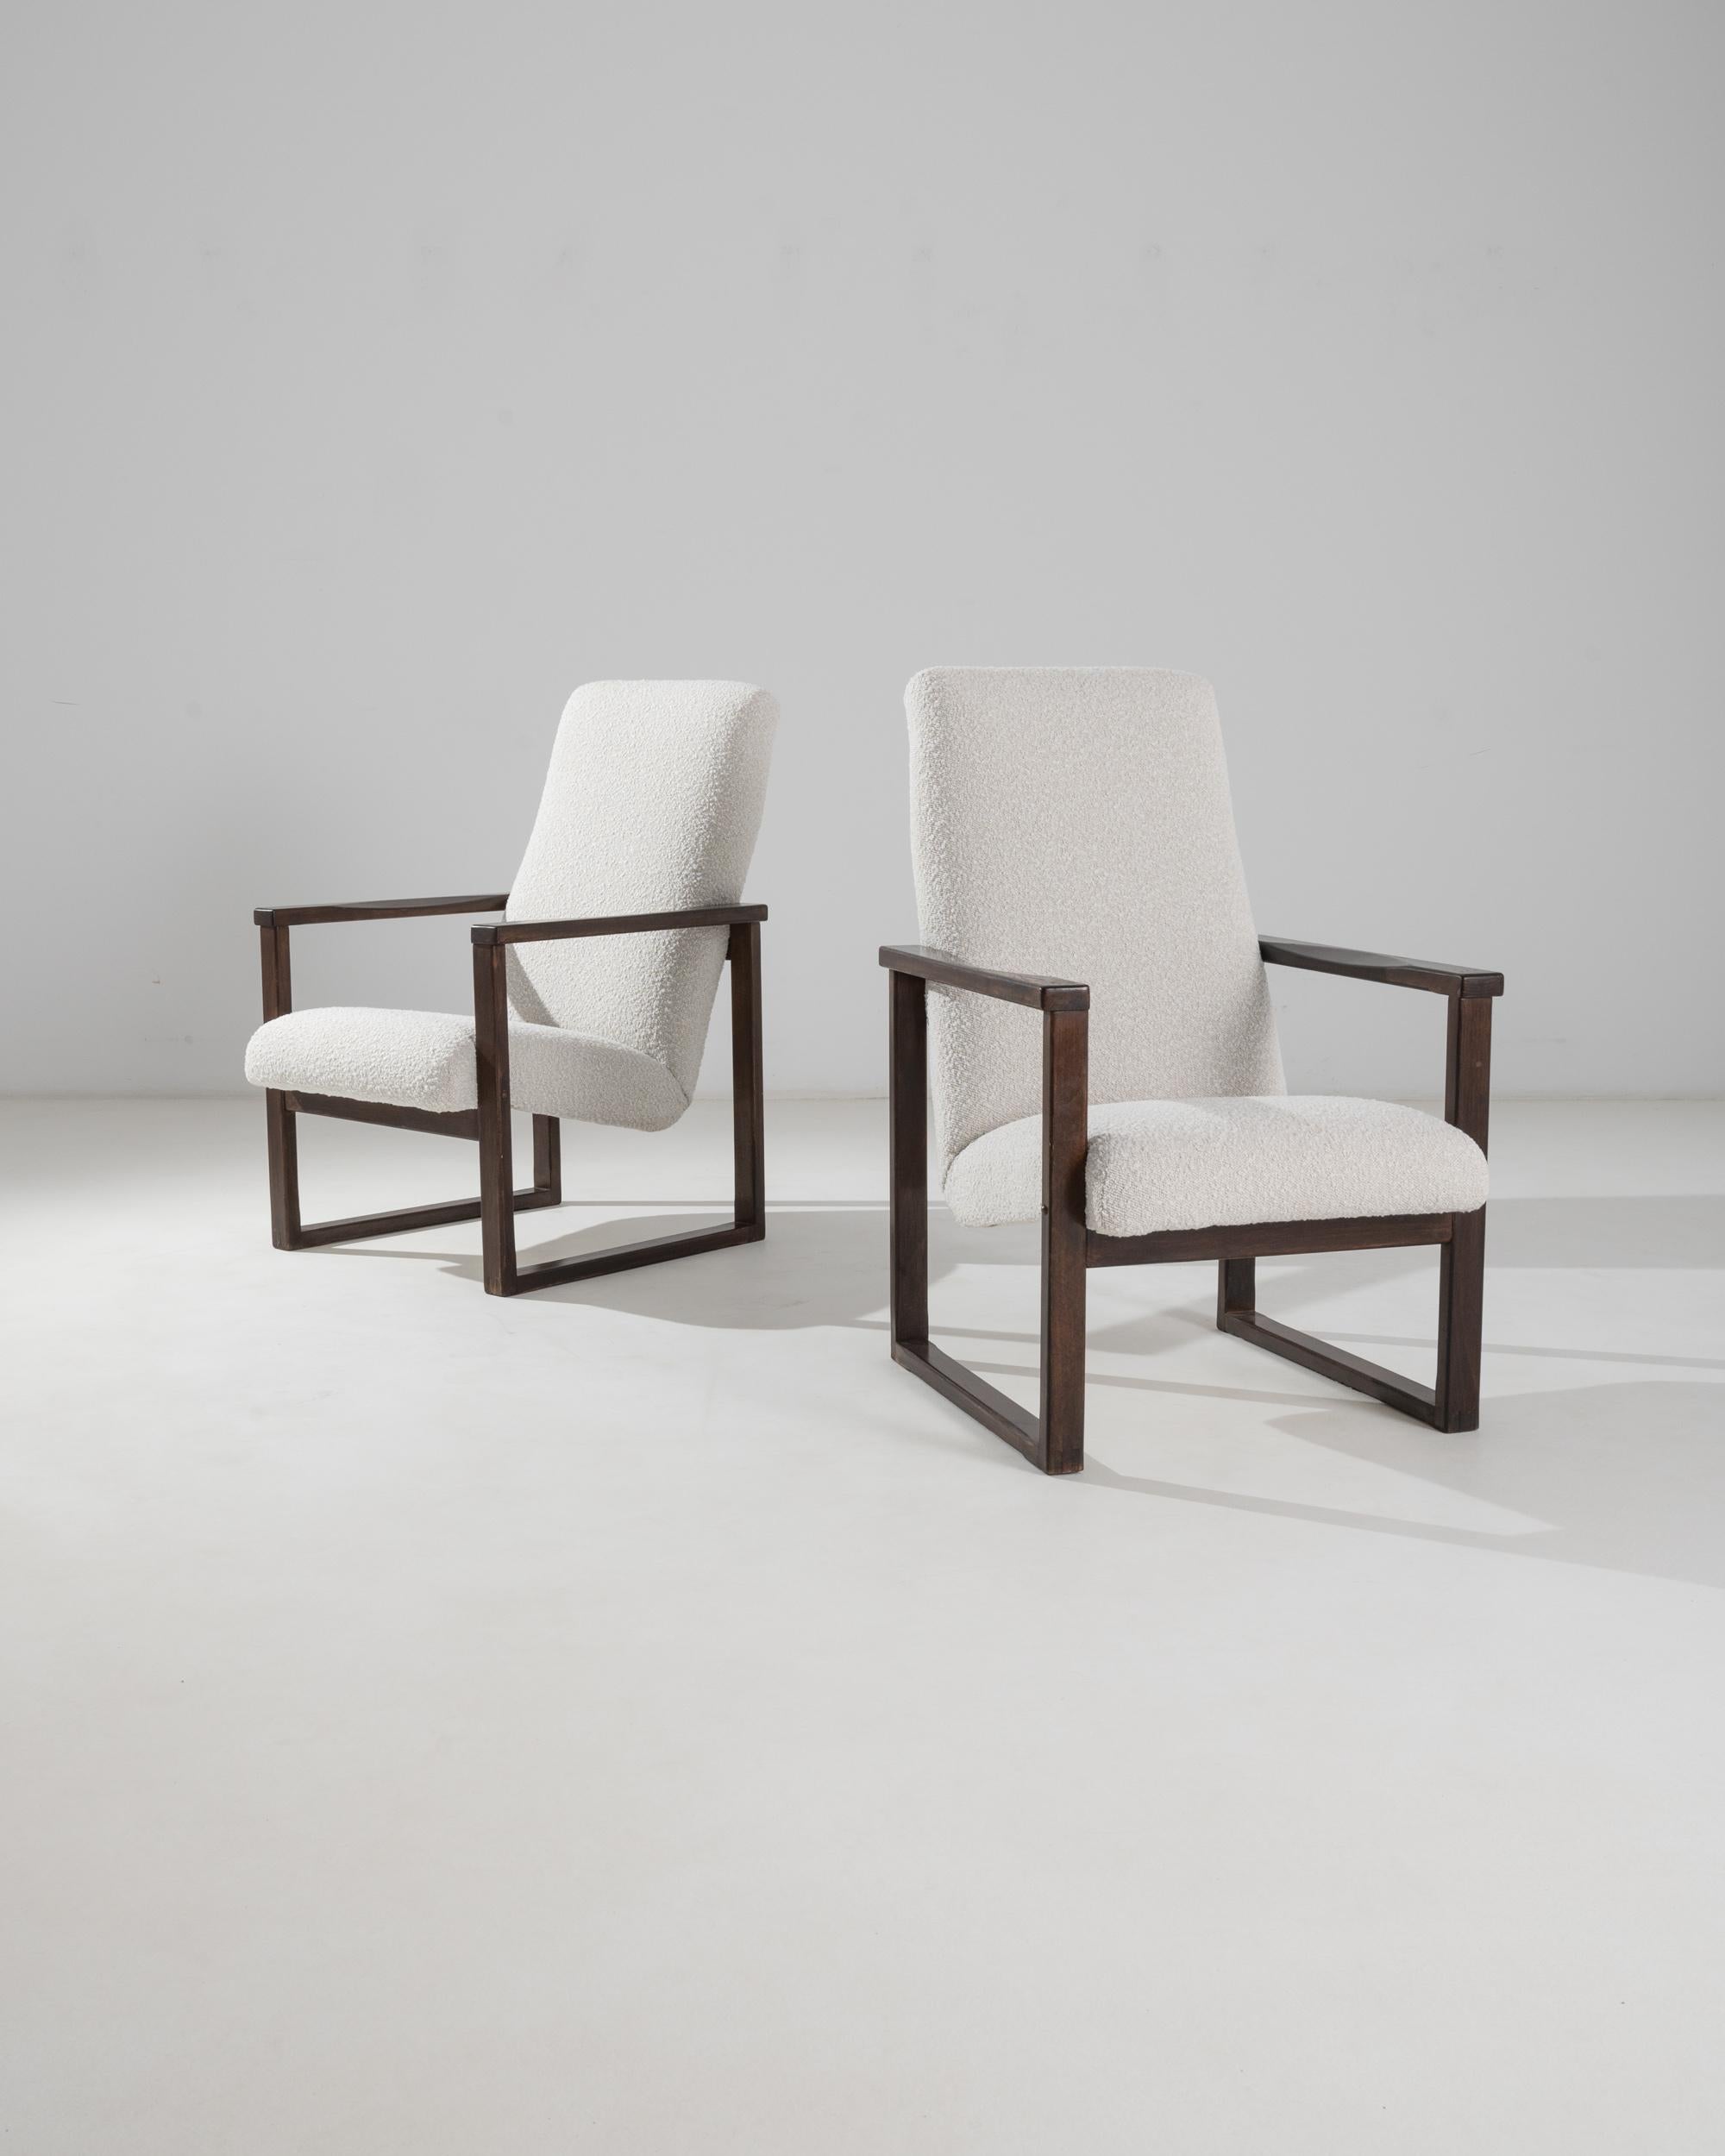 The graphic silhouette of this pair of vintage Modernist armchairs makes a striking impression. Made in Czechia in the 20th century, a cushioned seat appears to float weightlessly between two perfectly square frames of polished wood. This ingenious